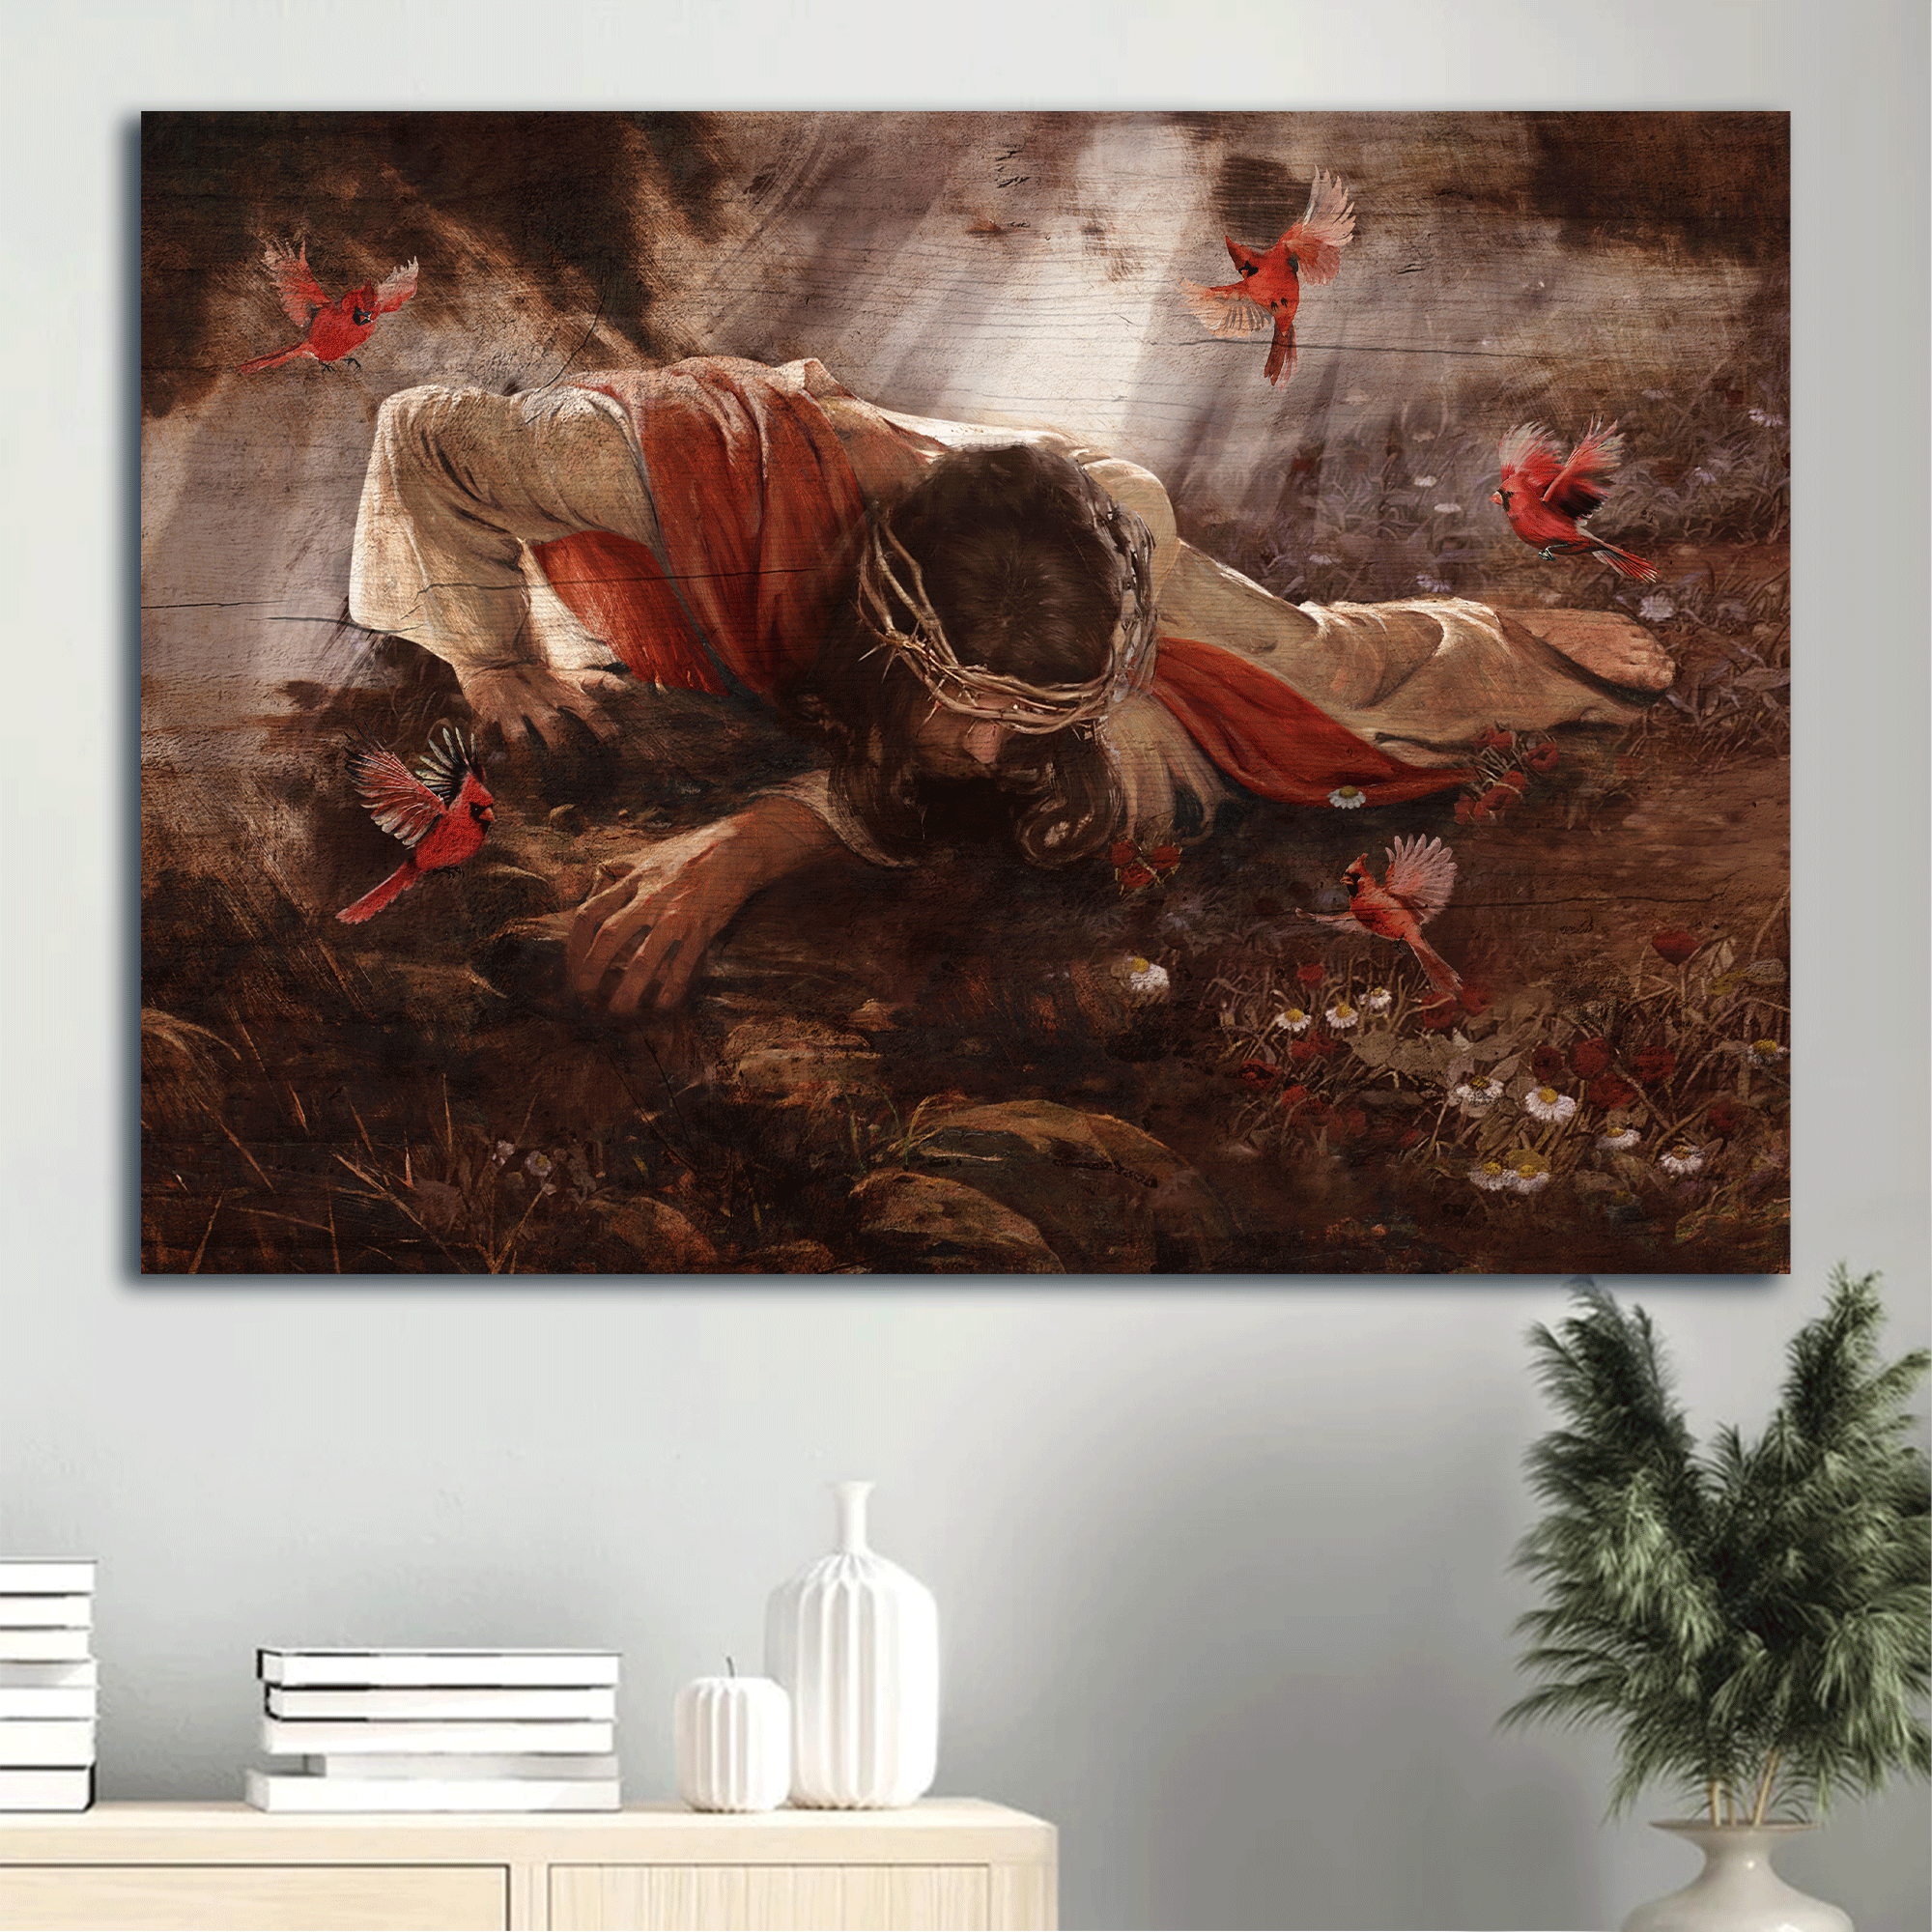 Jesus Landscape Canvas - Red cardinal, Jesus painting, Daisy flower, Crown of thorns, In the darkness Landscape Canvas - Gift For Christian Canvas Prints, Christian Wall Art